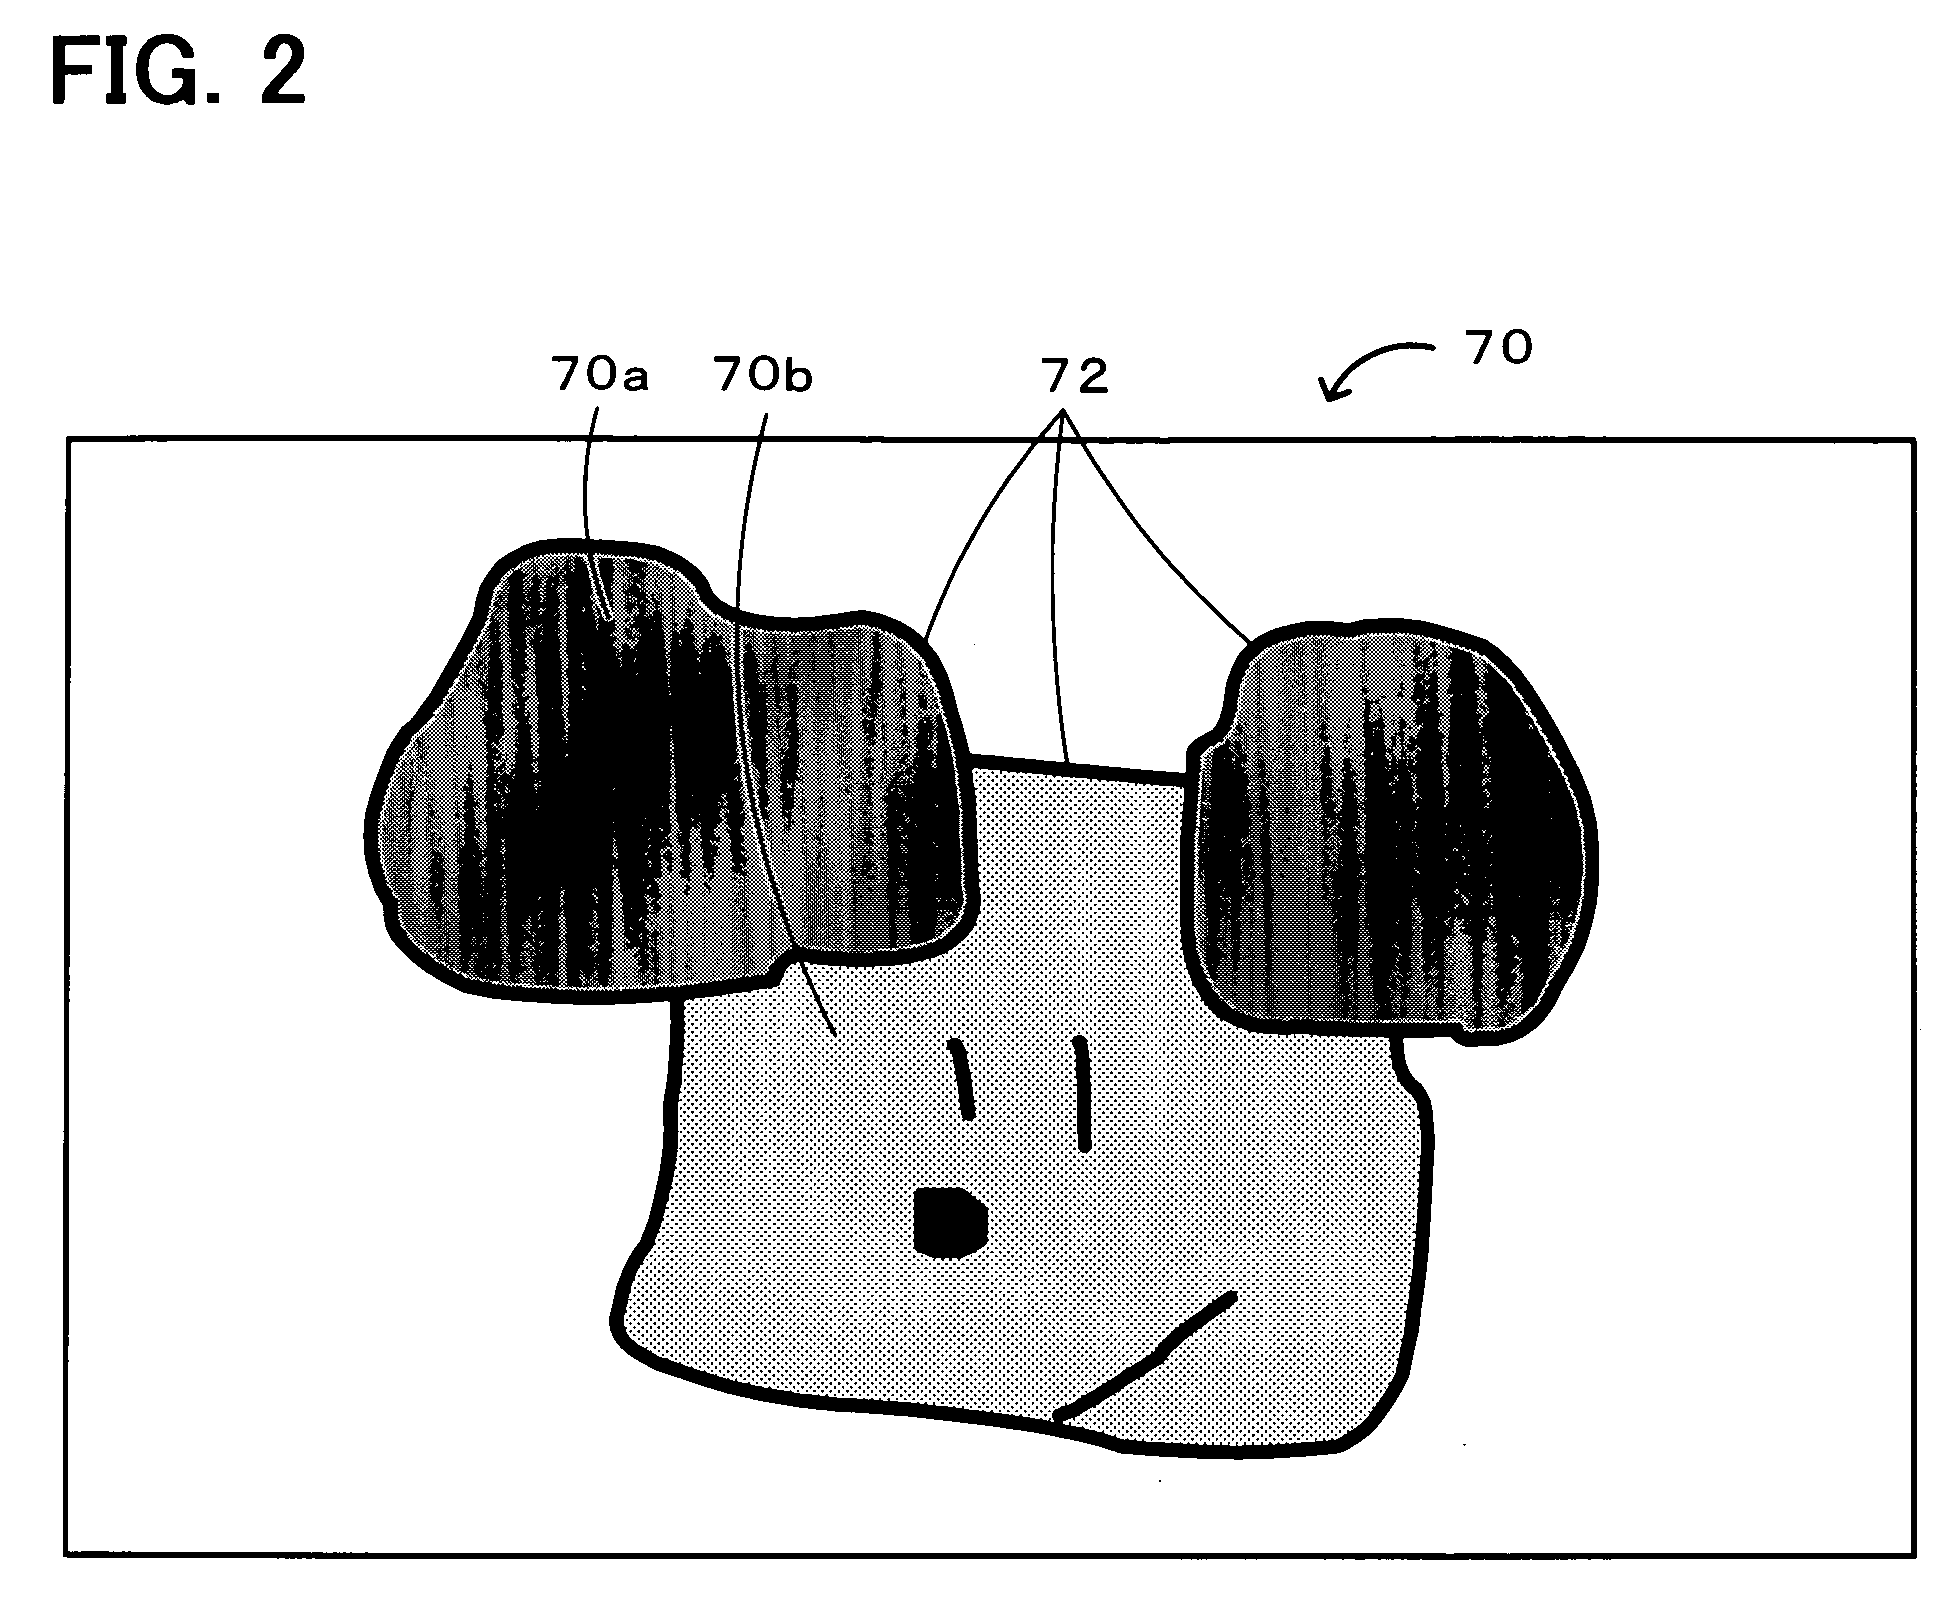 Coloring picture, coloring picture generating apparatus, and coloring picture generating method